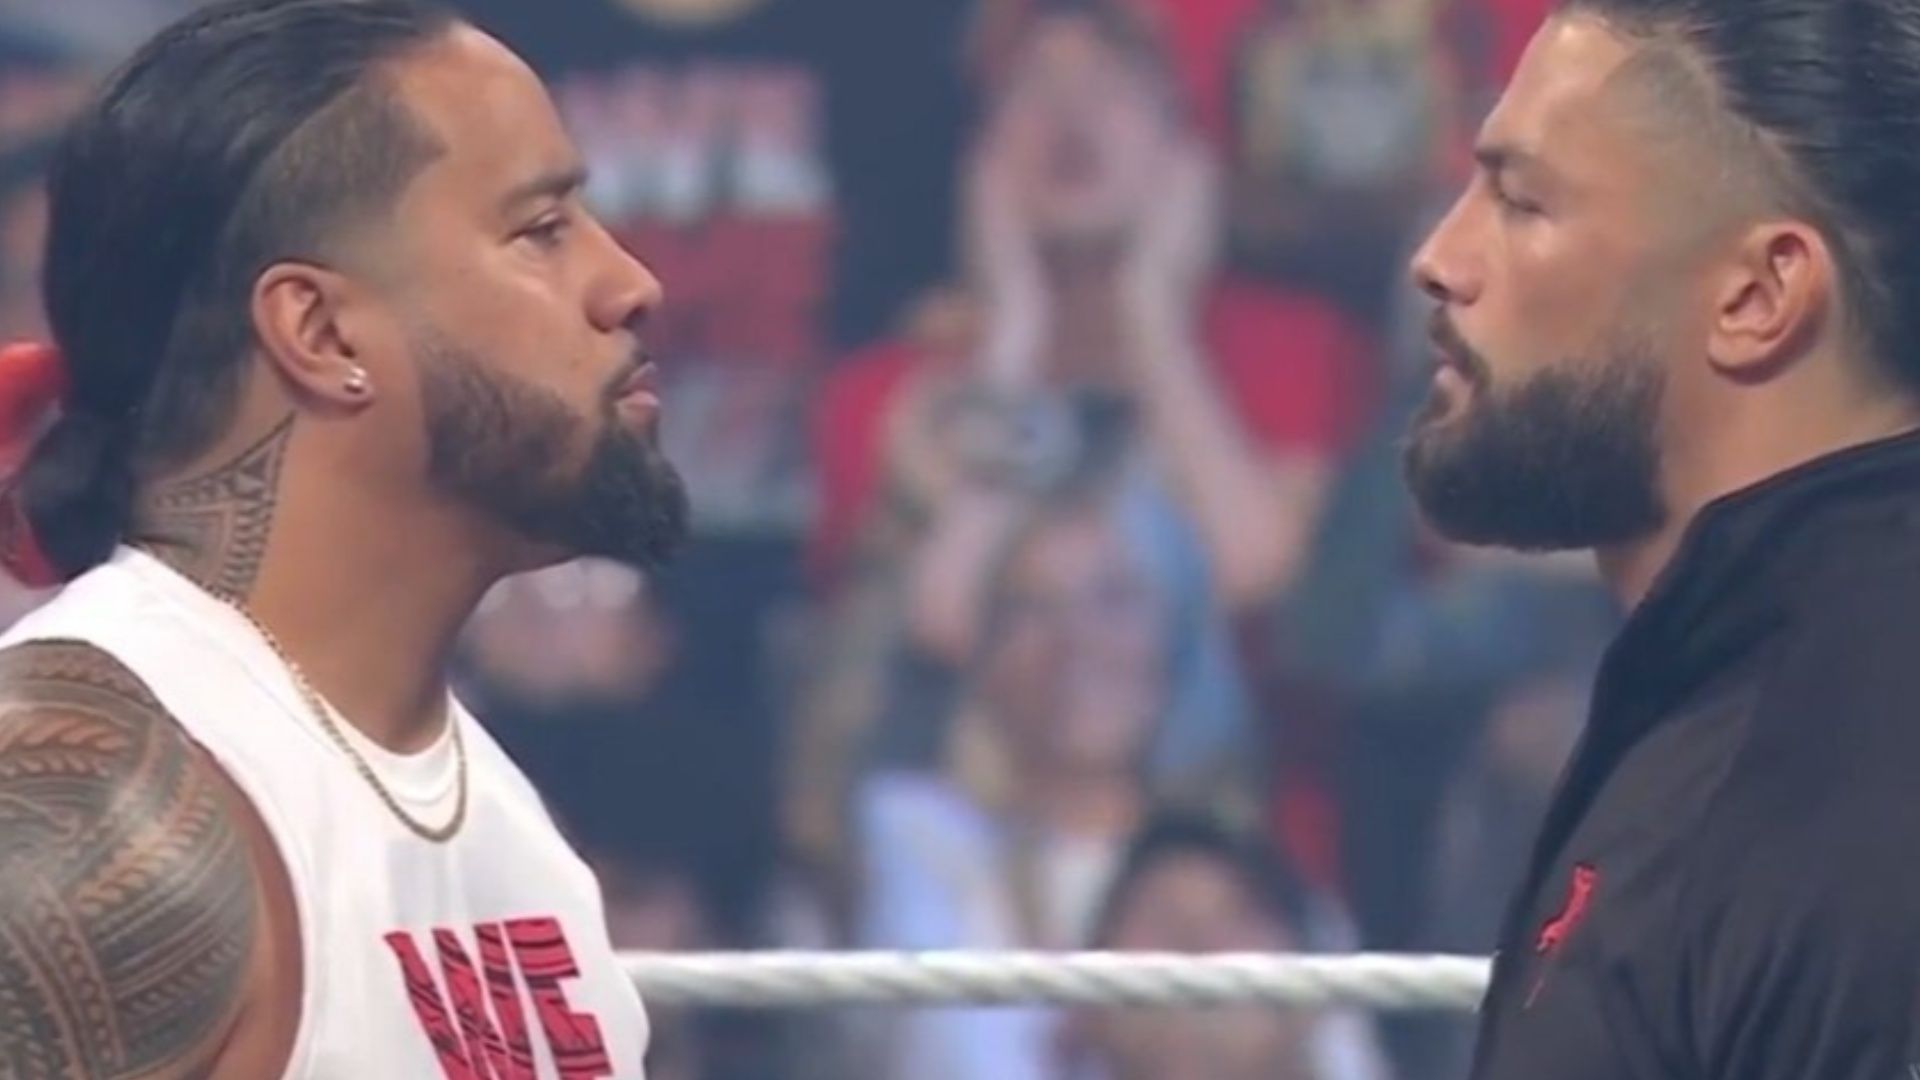 Jimmy Uso and Roman Reigns almost came to blows on WWE SmackDown this week.